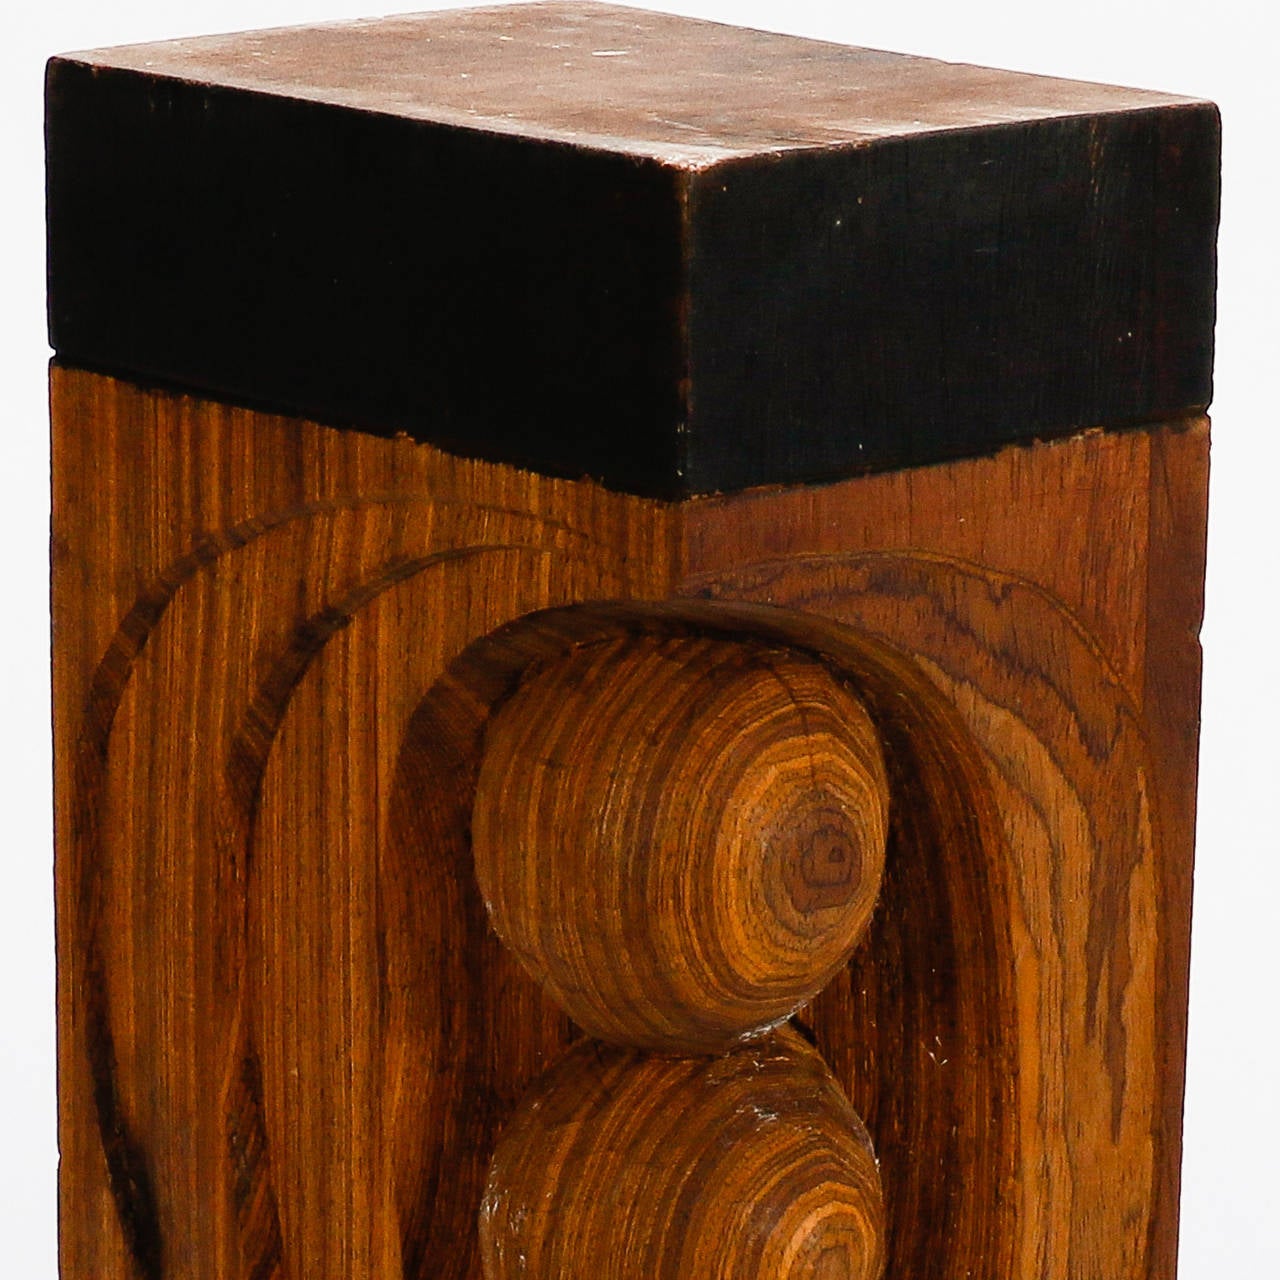 20th Century Carved Wood Sculpture by Italian Artist Flaviano Laghi For Sale